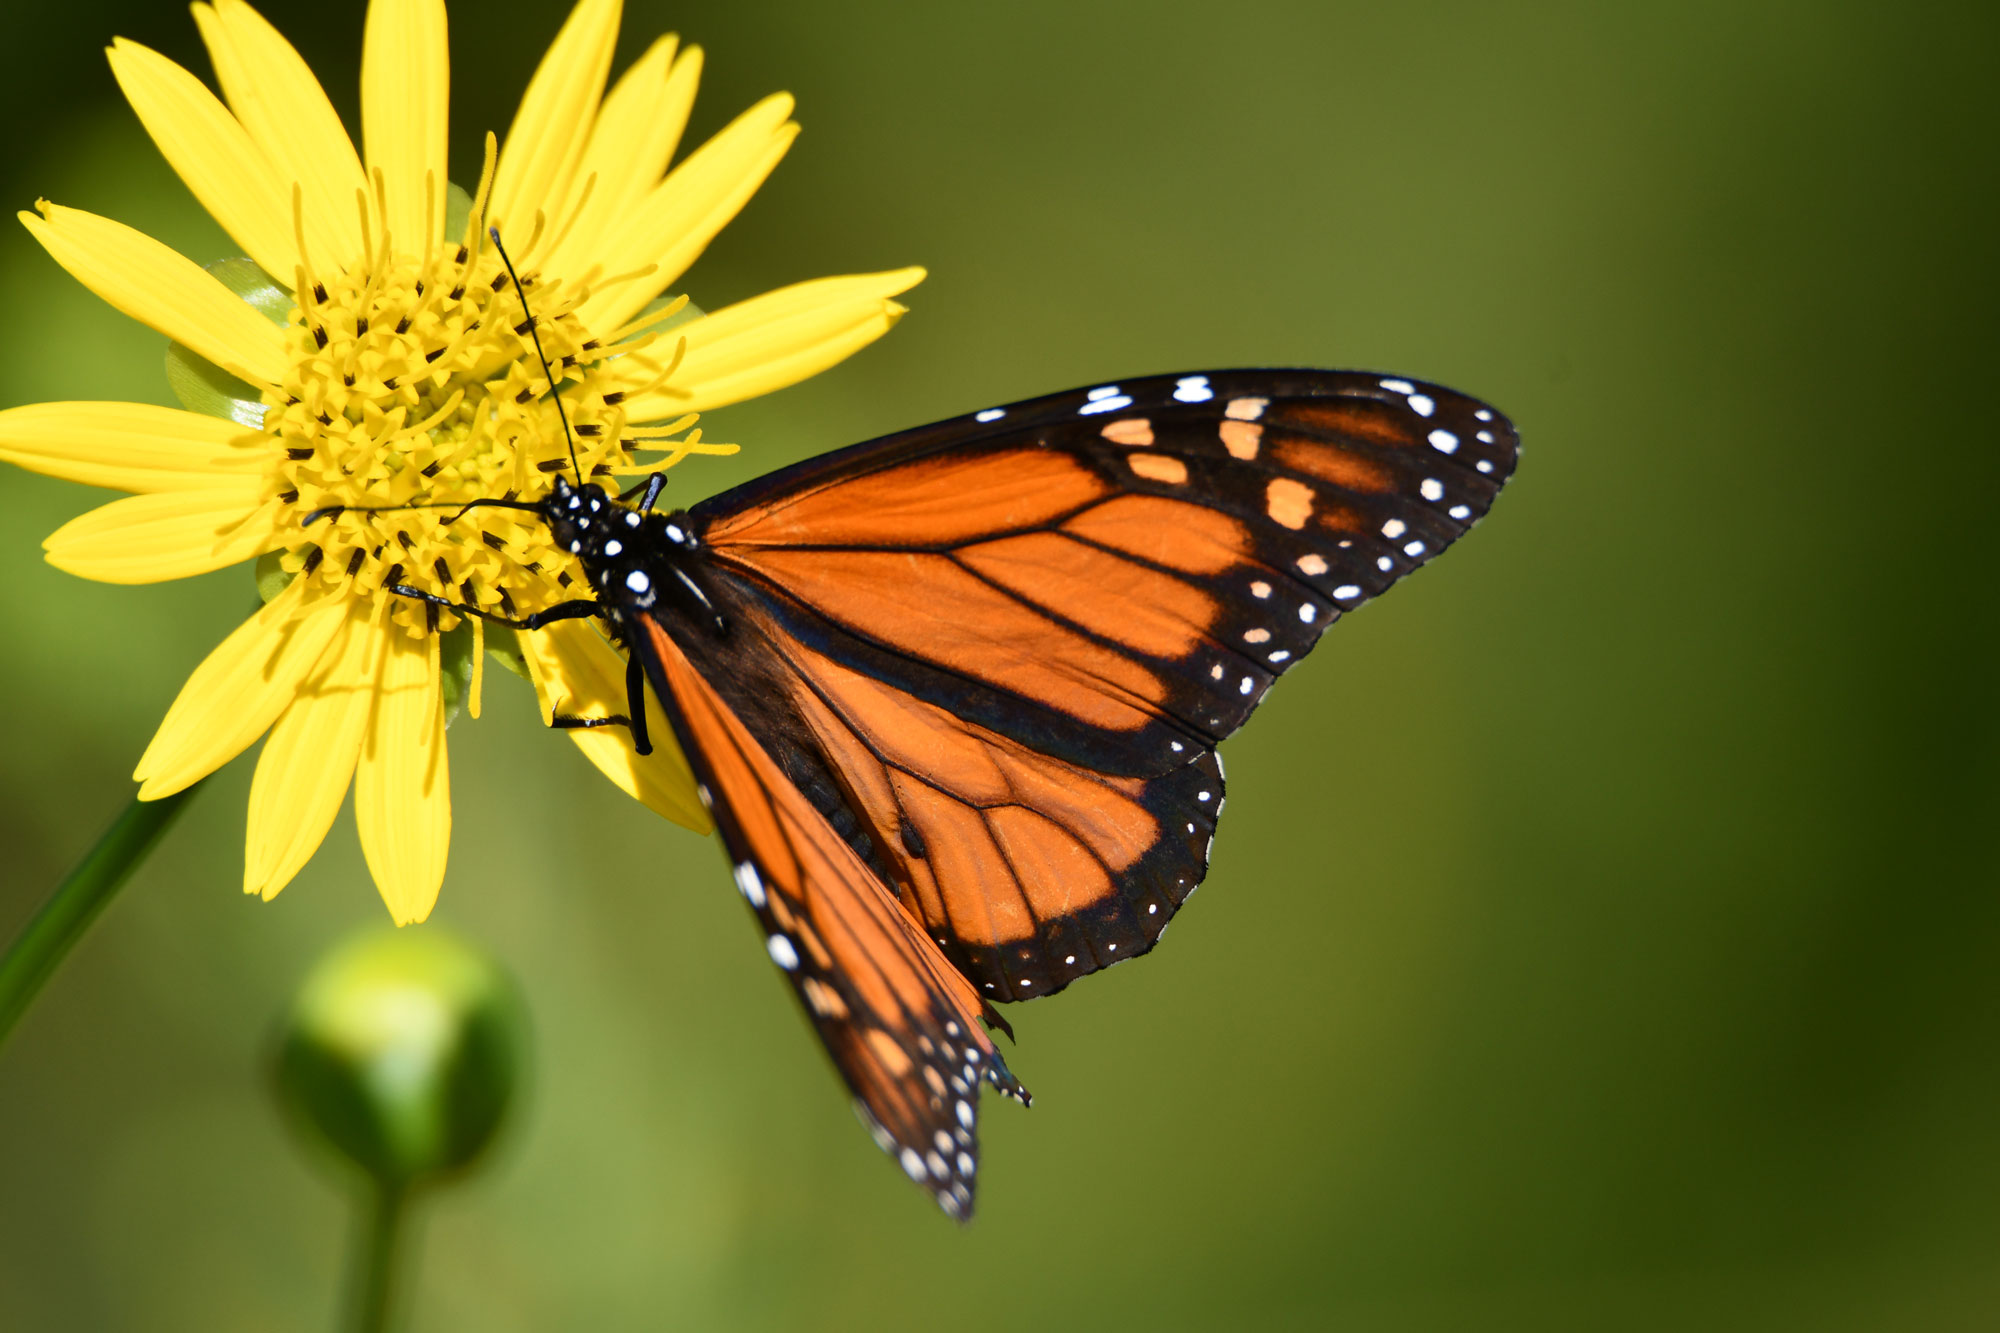 A monarch butterfly at rest on a yellow wildflower.